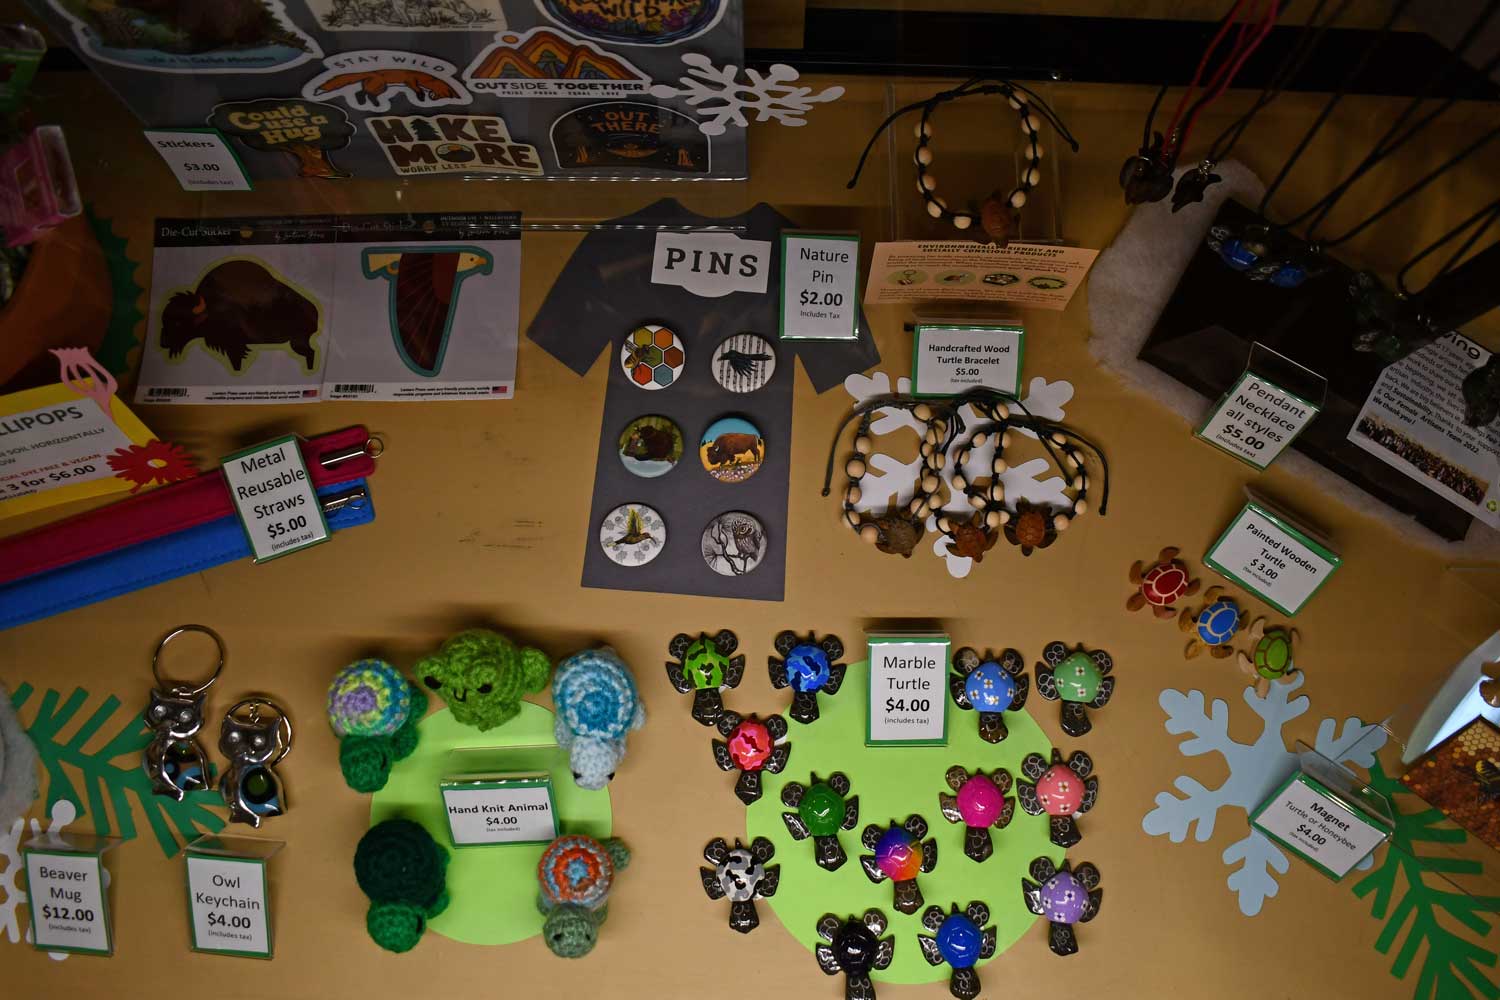 A close-up of gift shop items for sale.